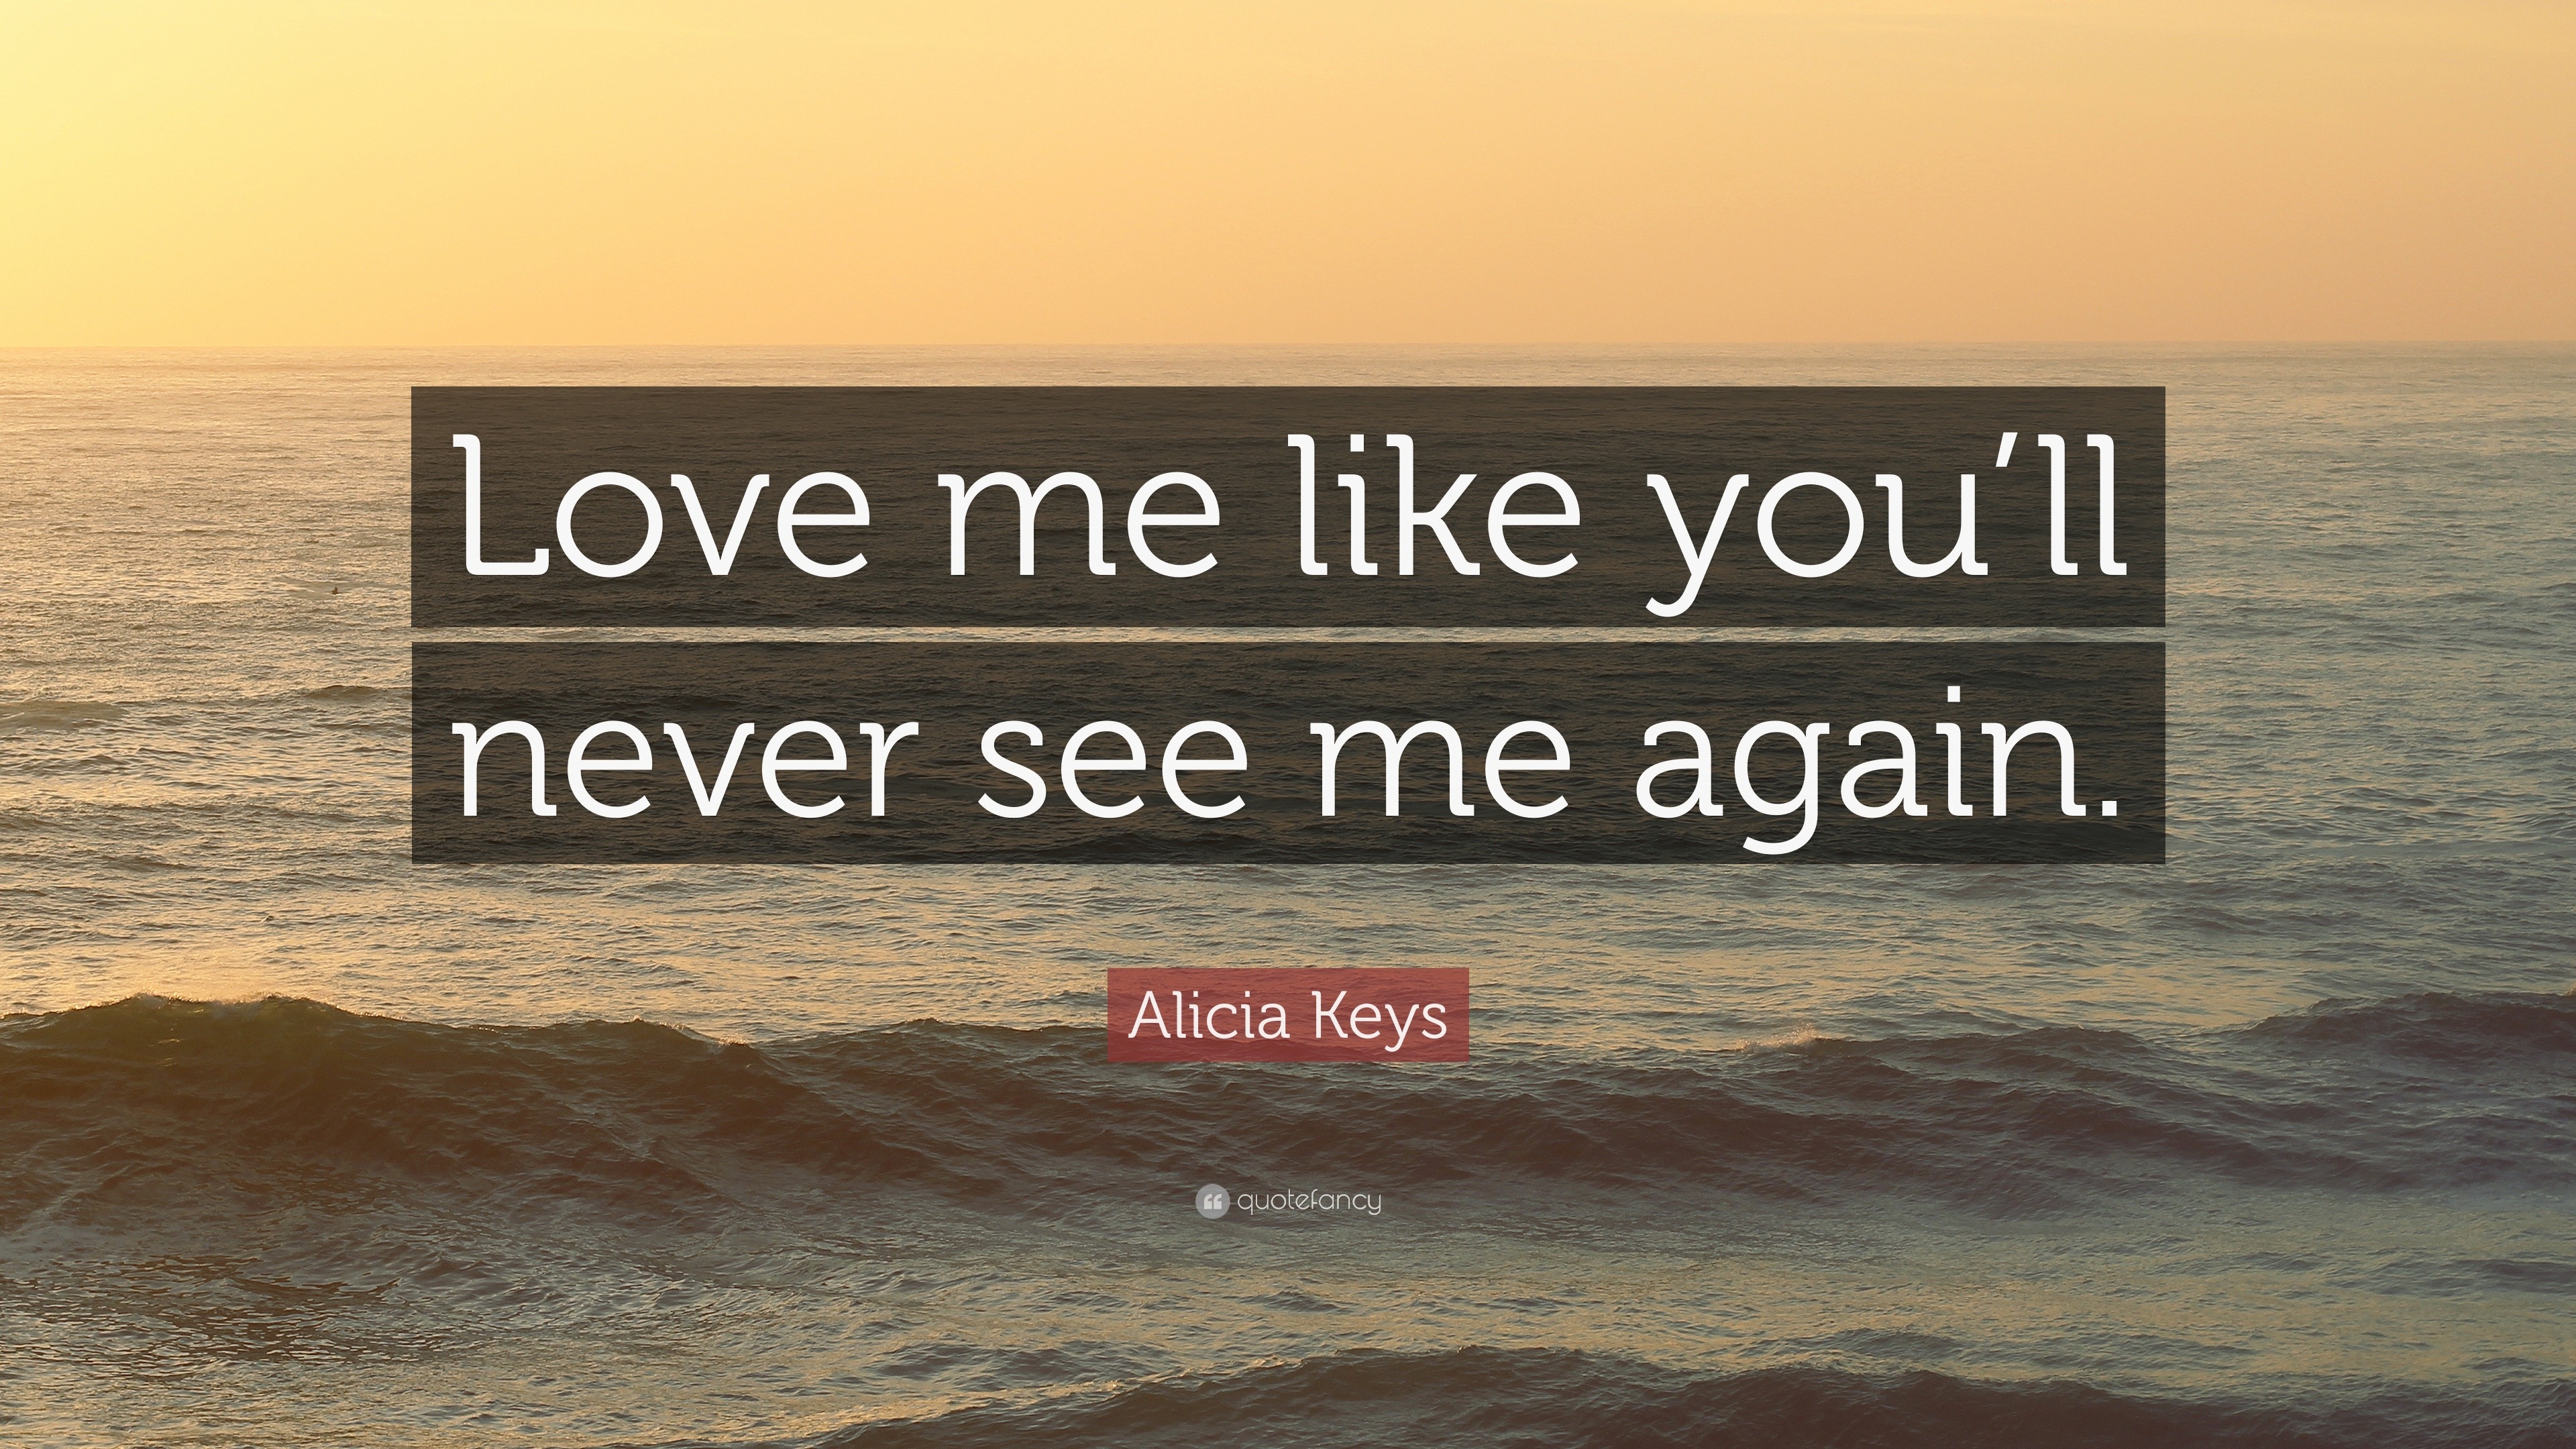 Alicia Keys Quote “Love me like you ll never see me again